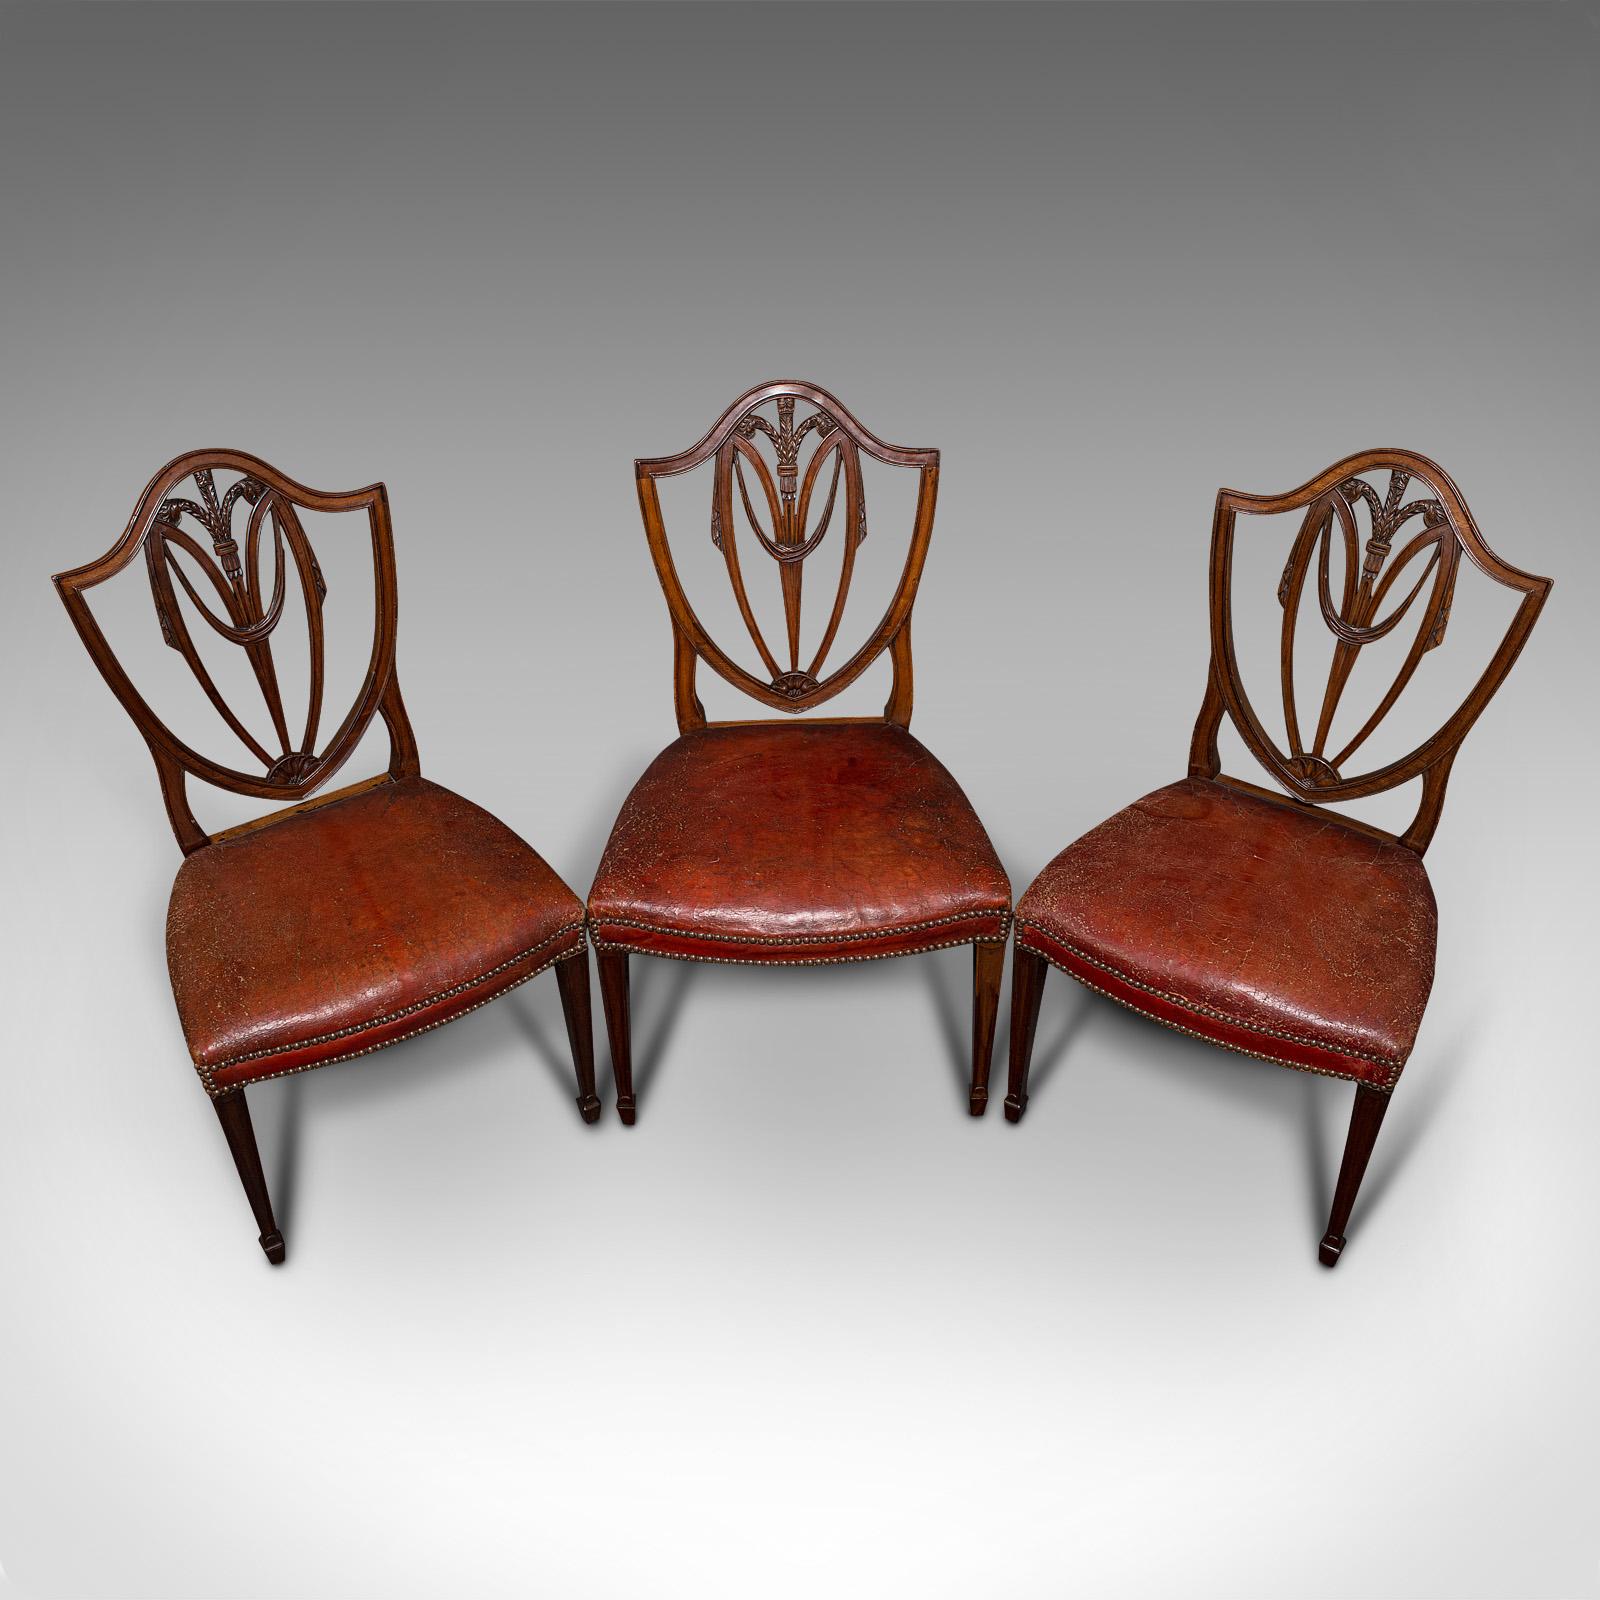 Set of 6, Antique Shield Back Chairs, Dining Seat, After Hepplewhite, Georgian 2